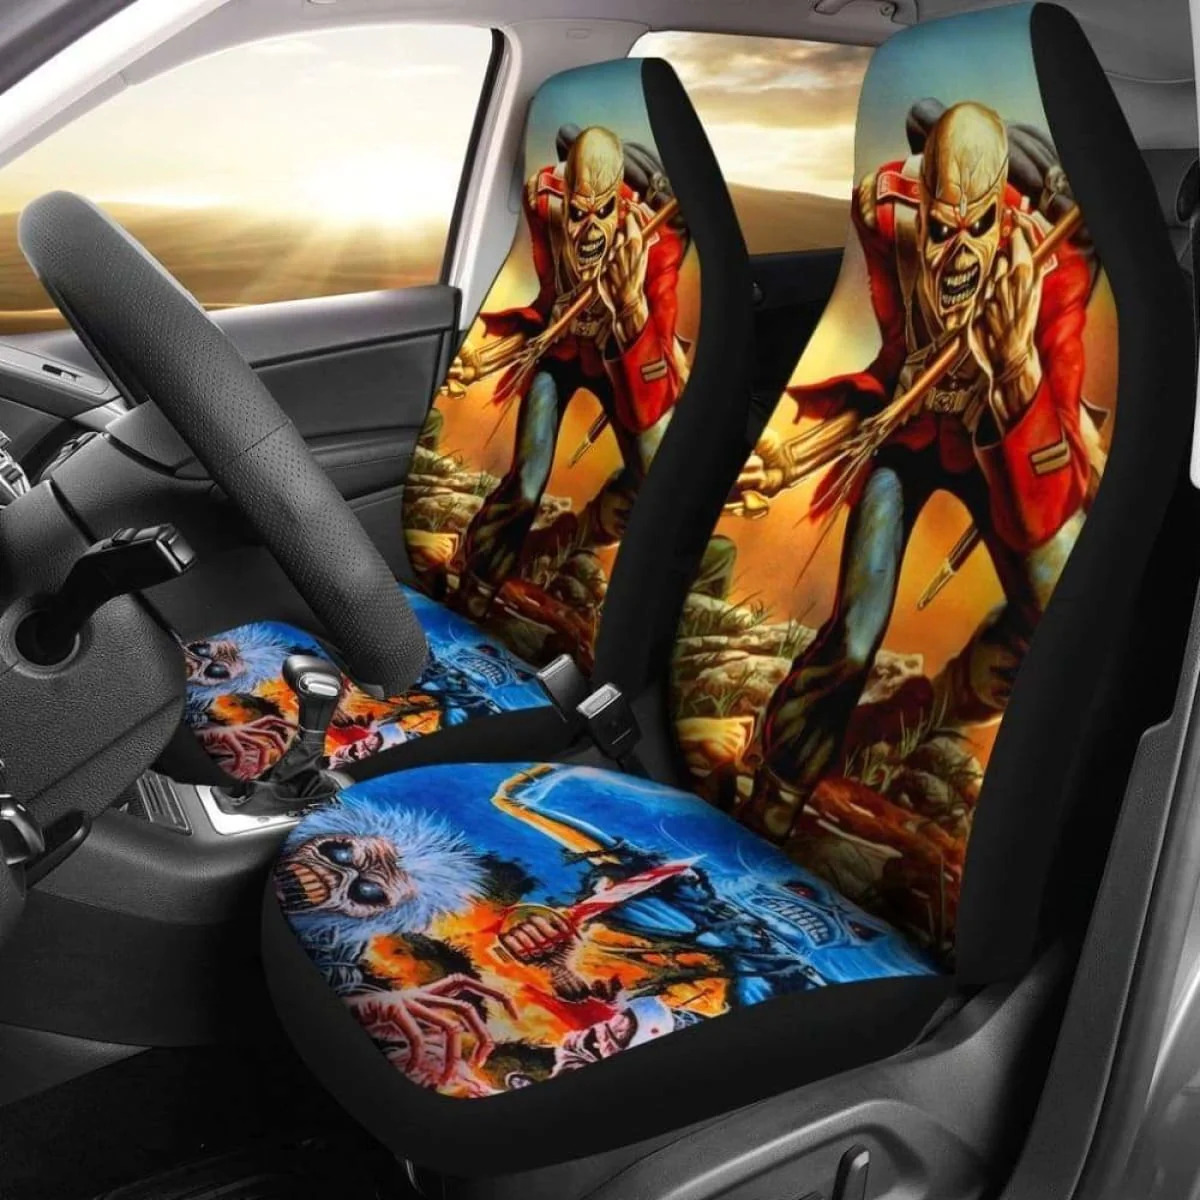 Gift Idea for Lovers Rock Music Iron Maiden Car seat cover